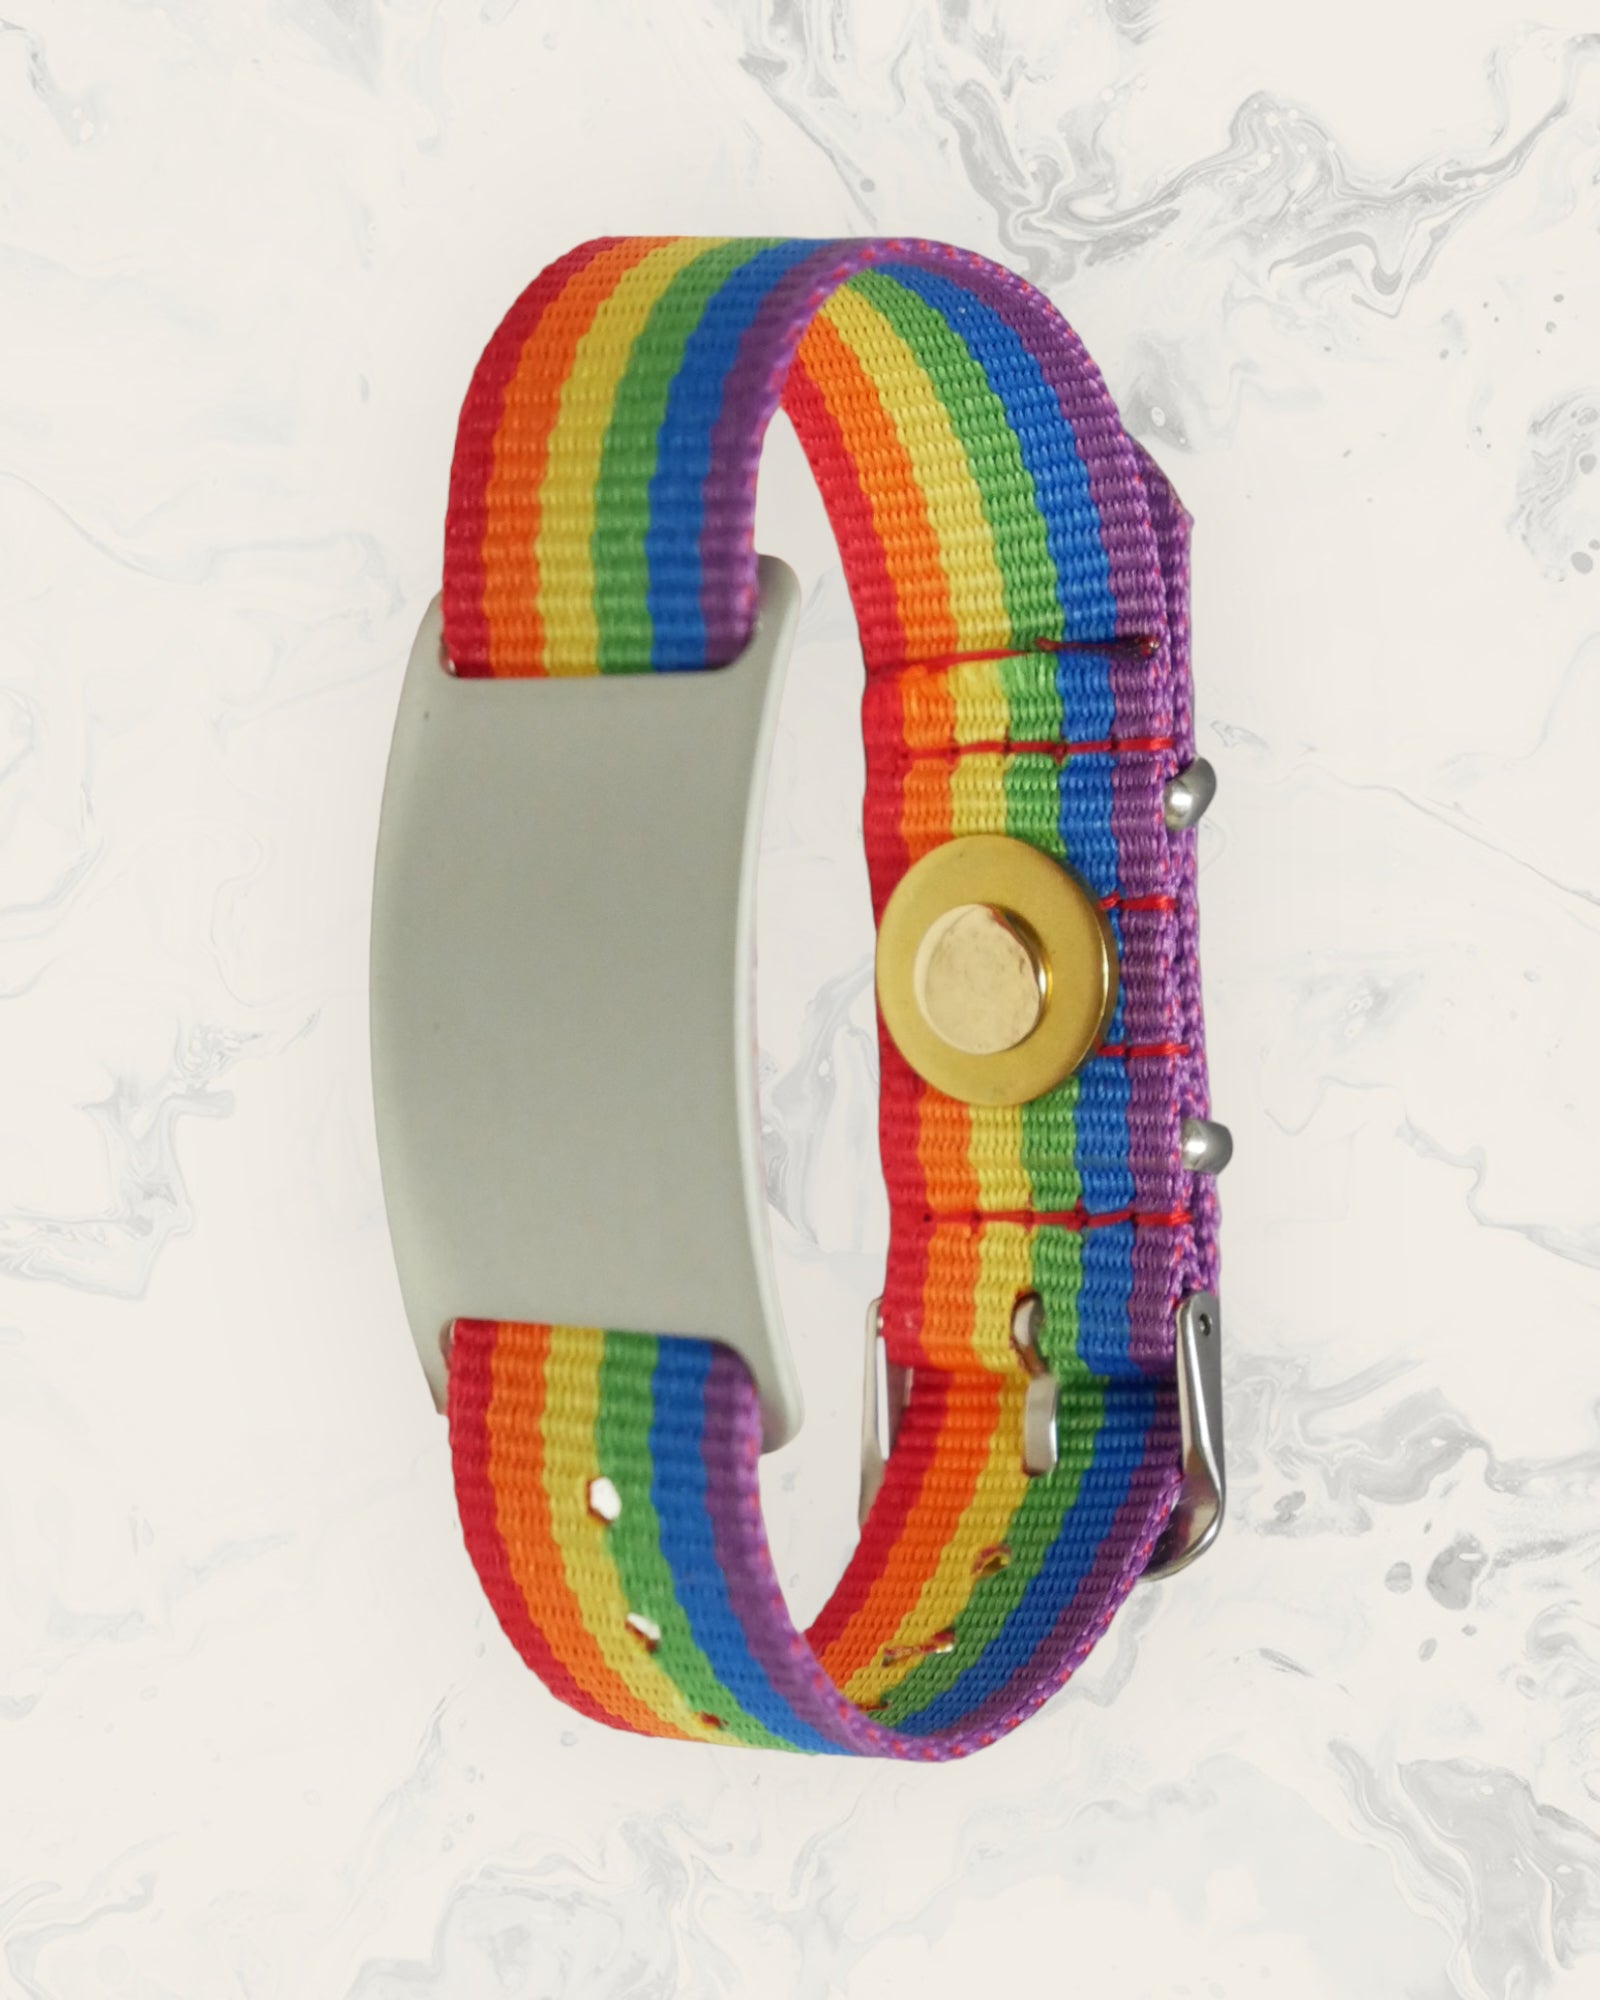 Natural Pain Relief and EMF Protection Bracelet Nylon Band Color Rainbow Striped with a Silver Slider